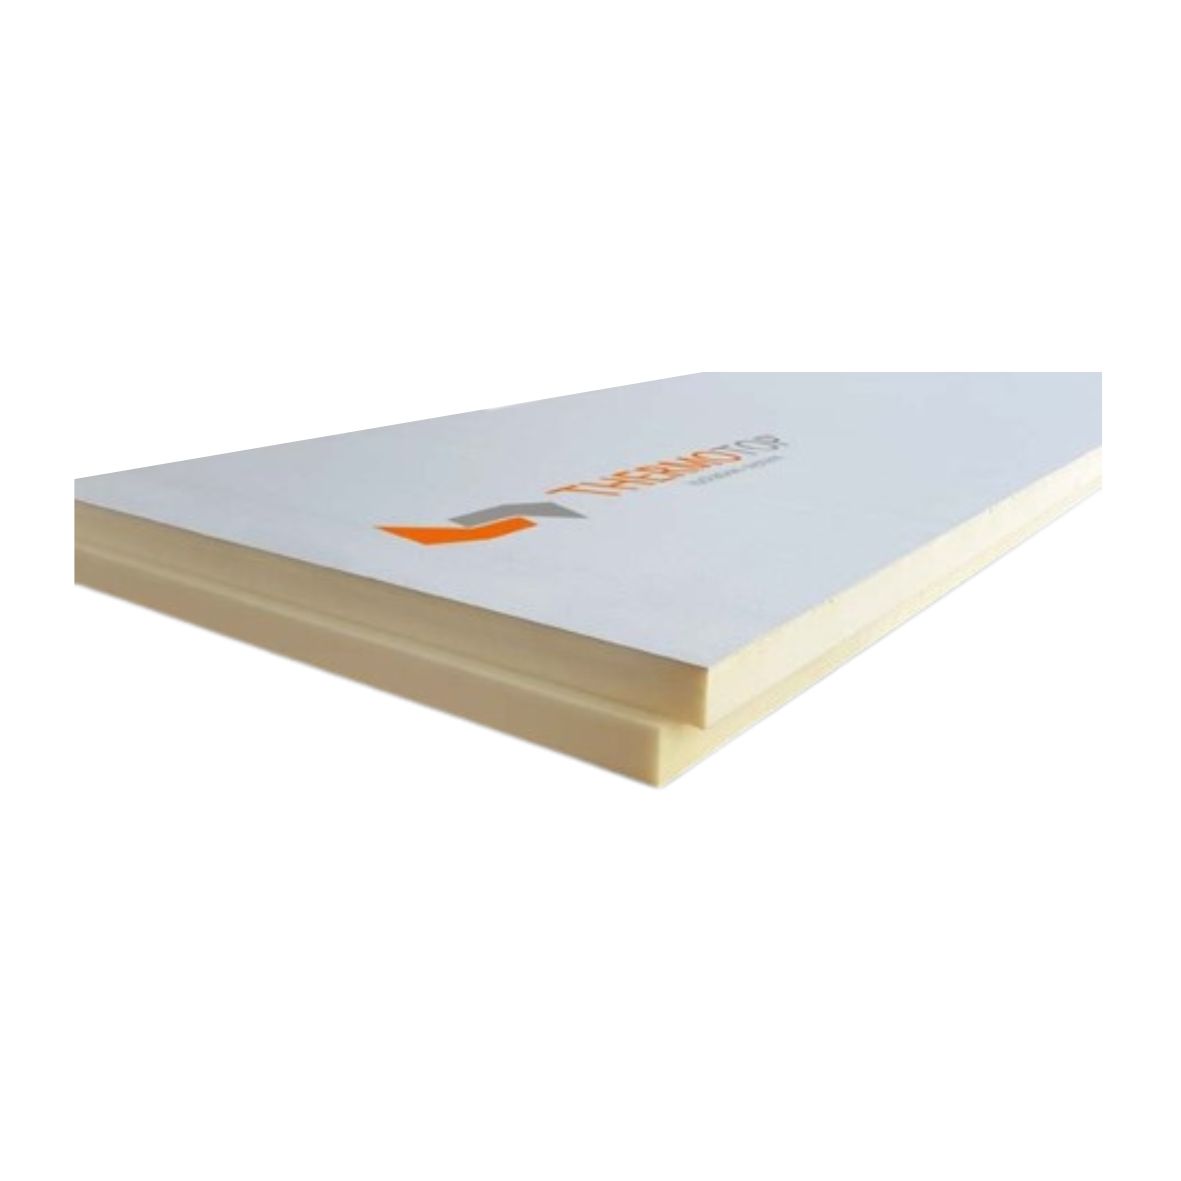 PIR Thermal insulation boards - Thermotop Toboard PIR BV-BV thermal insulation board 100 x 1200 x 2400 mm, https:maxbau.ro